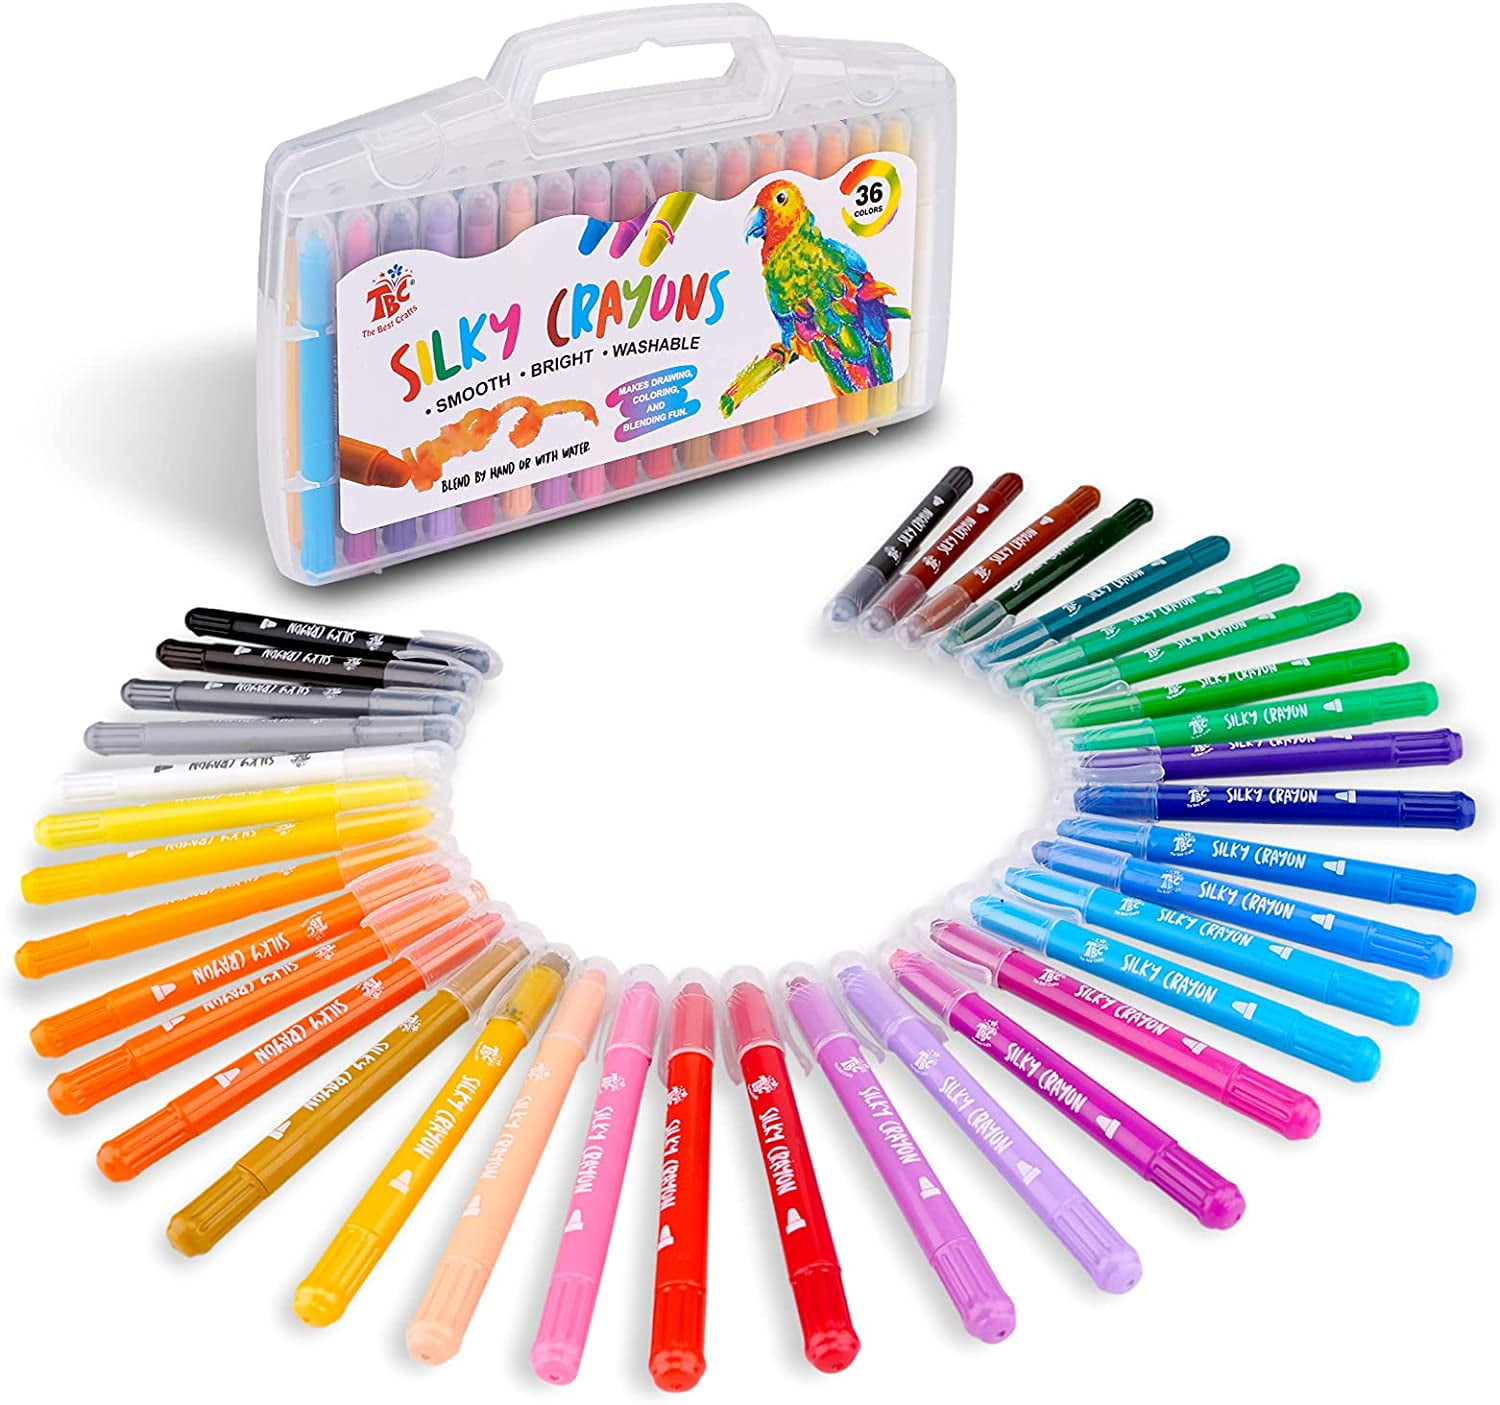 Super Doodle Gel Crayons 24 Colors Twistable Washable Super Crayons for Kids and Adults Silky Smooth Slick Watercolor Crayon Coloring Set